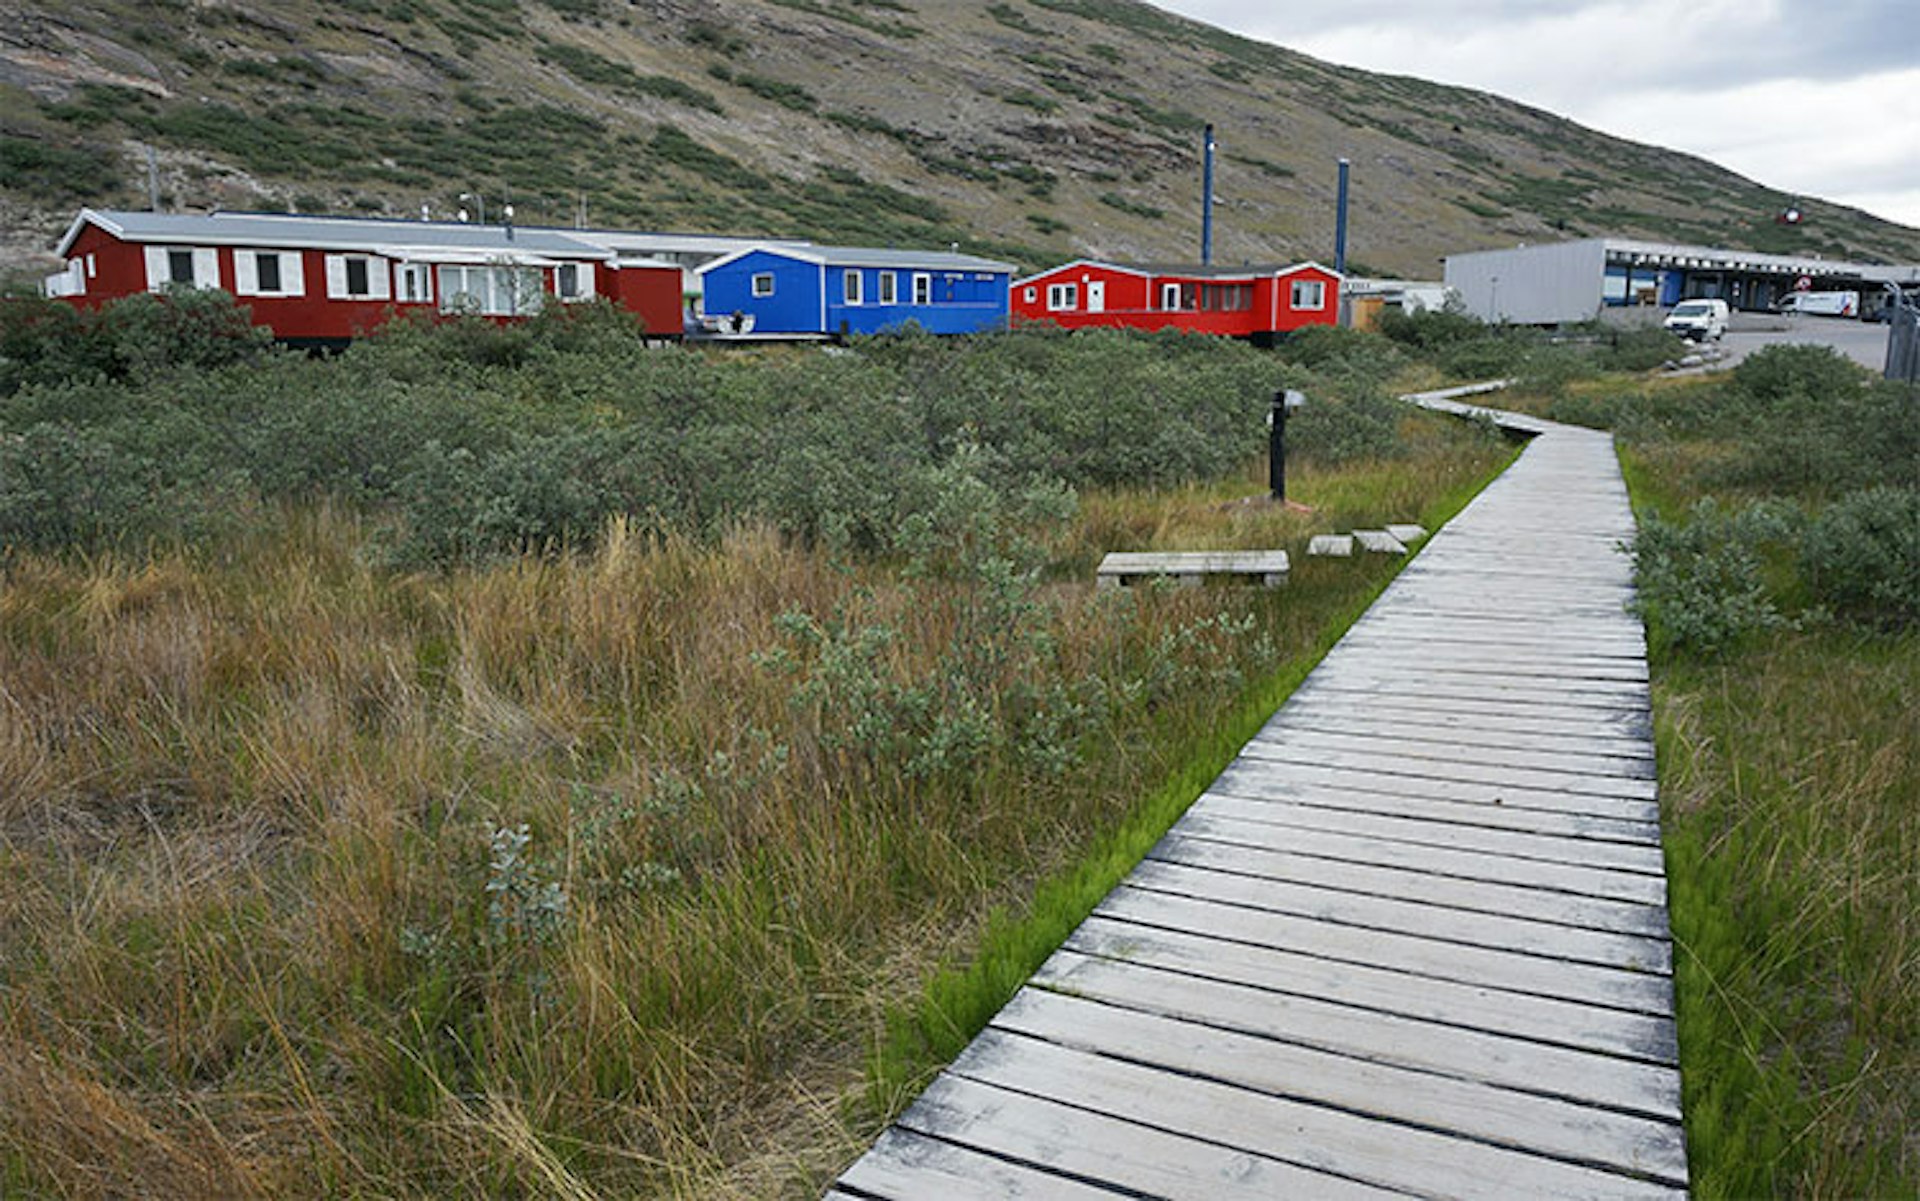 Brightly coloured buildings bring some Greenlandic charm to the remote town of Kangerlussuaq. Image by Anita Isalska / Lonely Planet